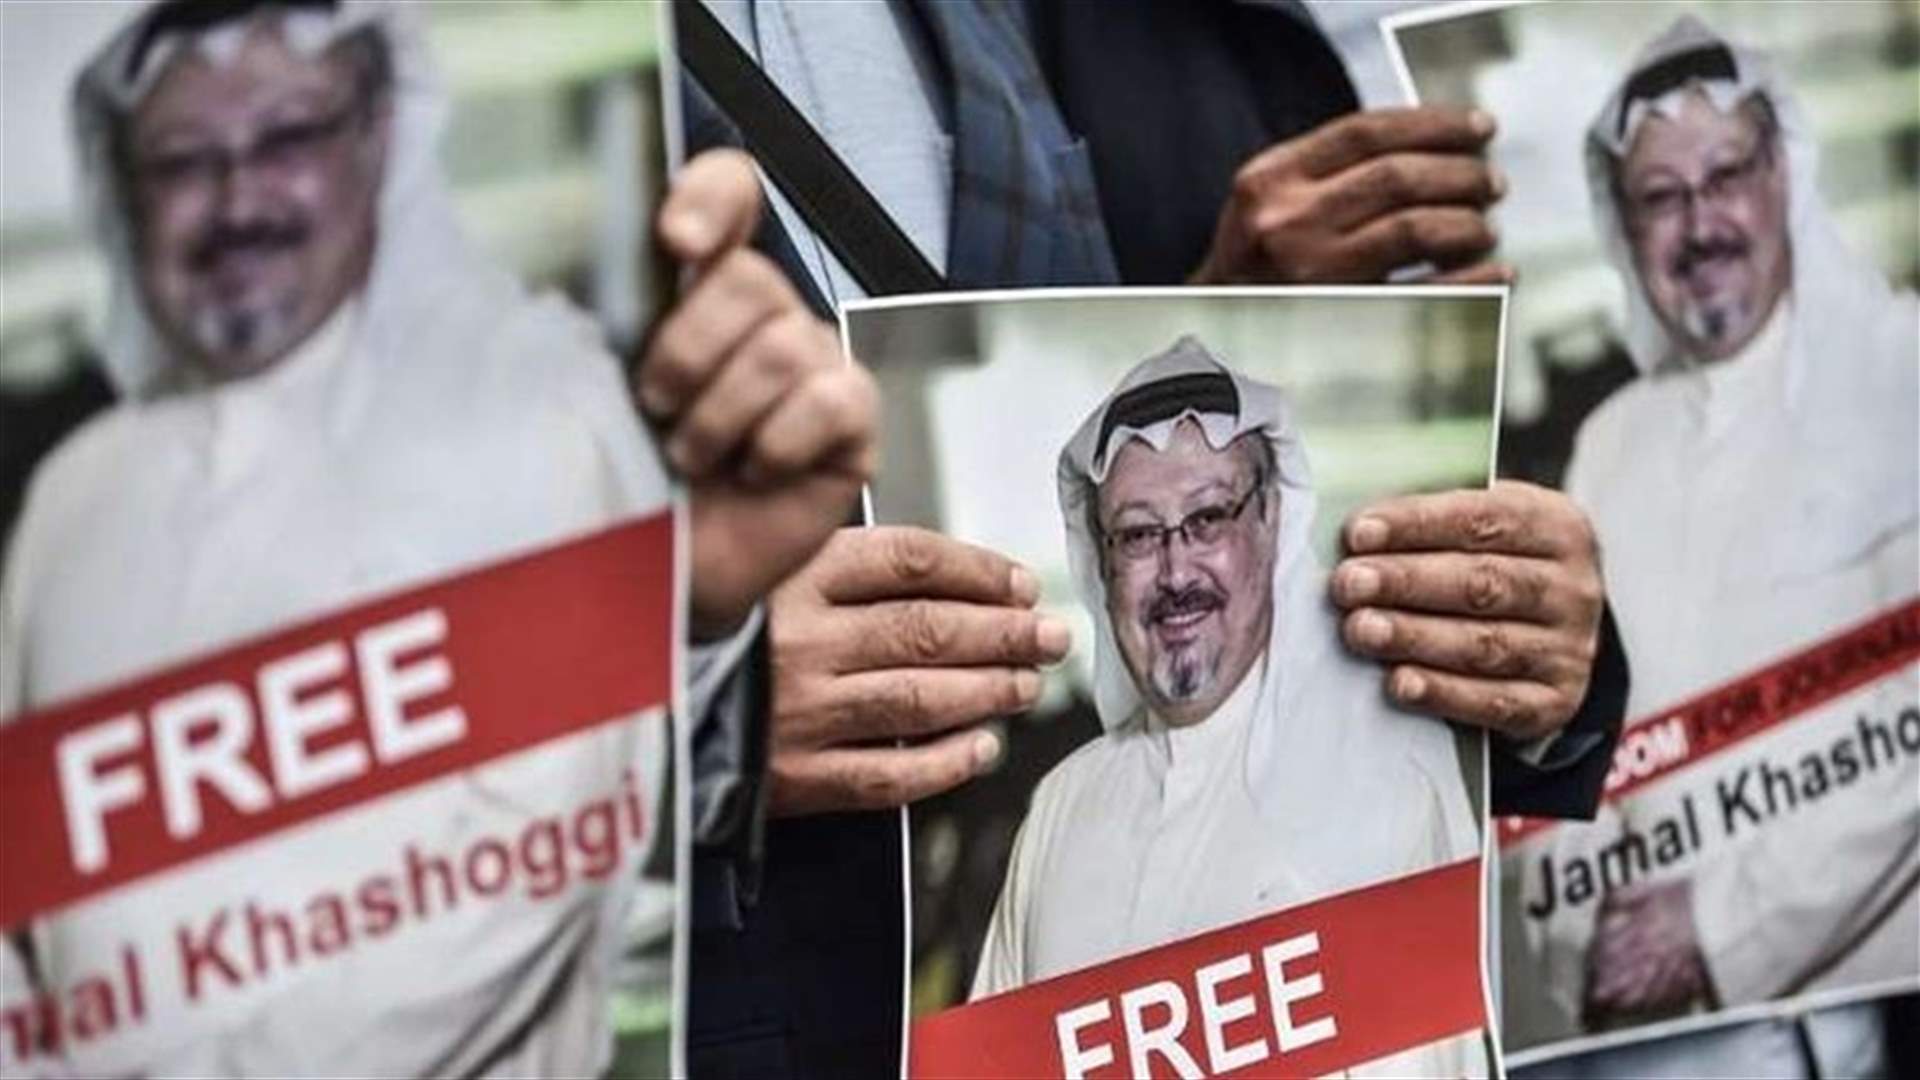 Turkish police have audio showing Khashoggi was killed at consulate – Reuters citing sources